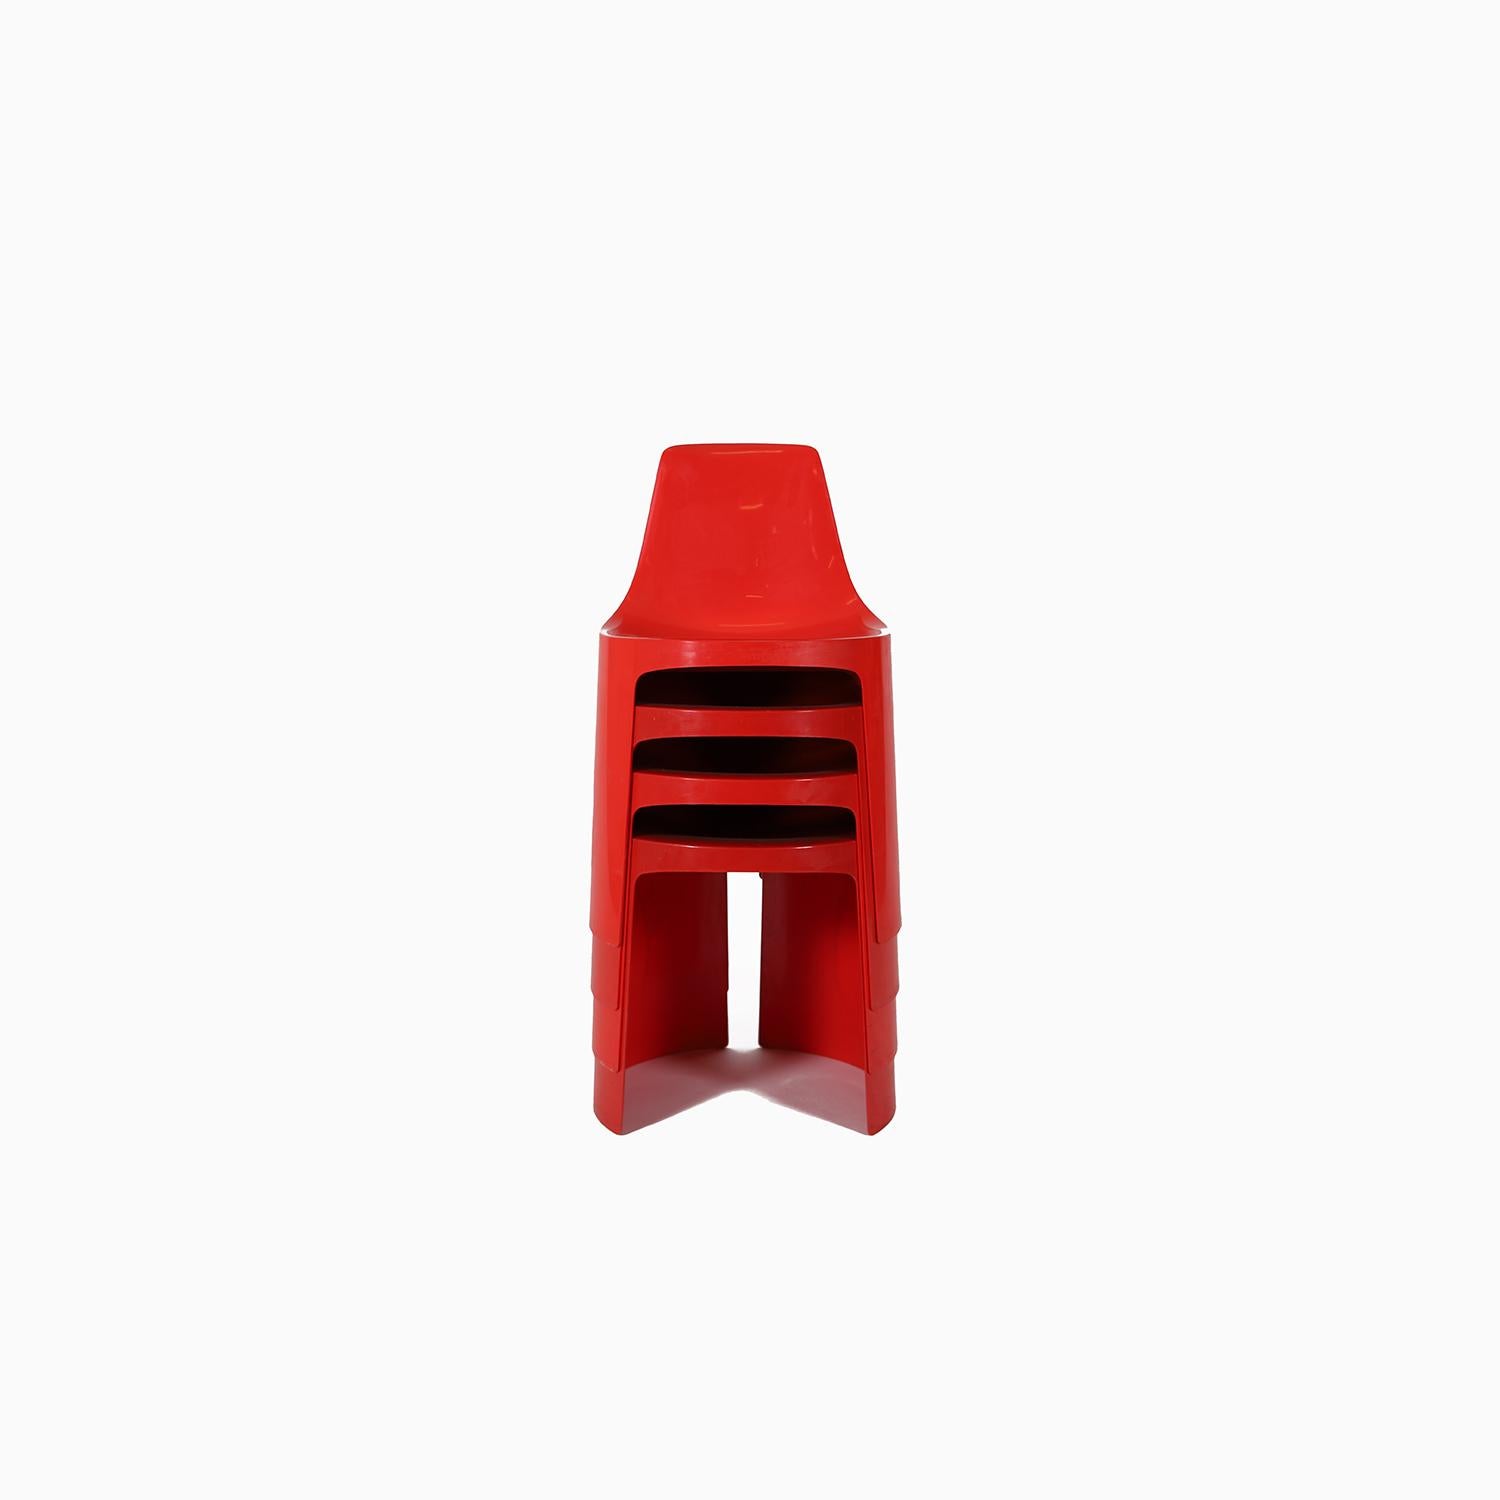  'Umbo' Red Molded Plastic Stacking Chair Set by Kay LeRoy Ruggles In Excellent Condition For Sale In Minneapolis, MN